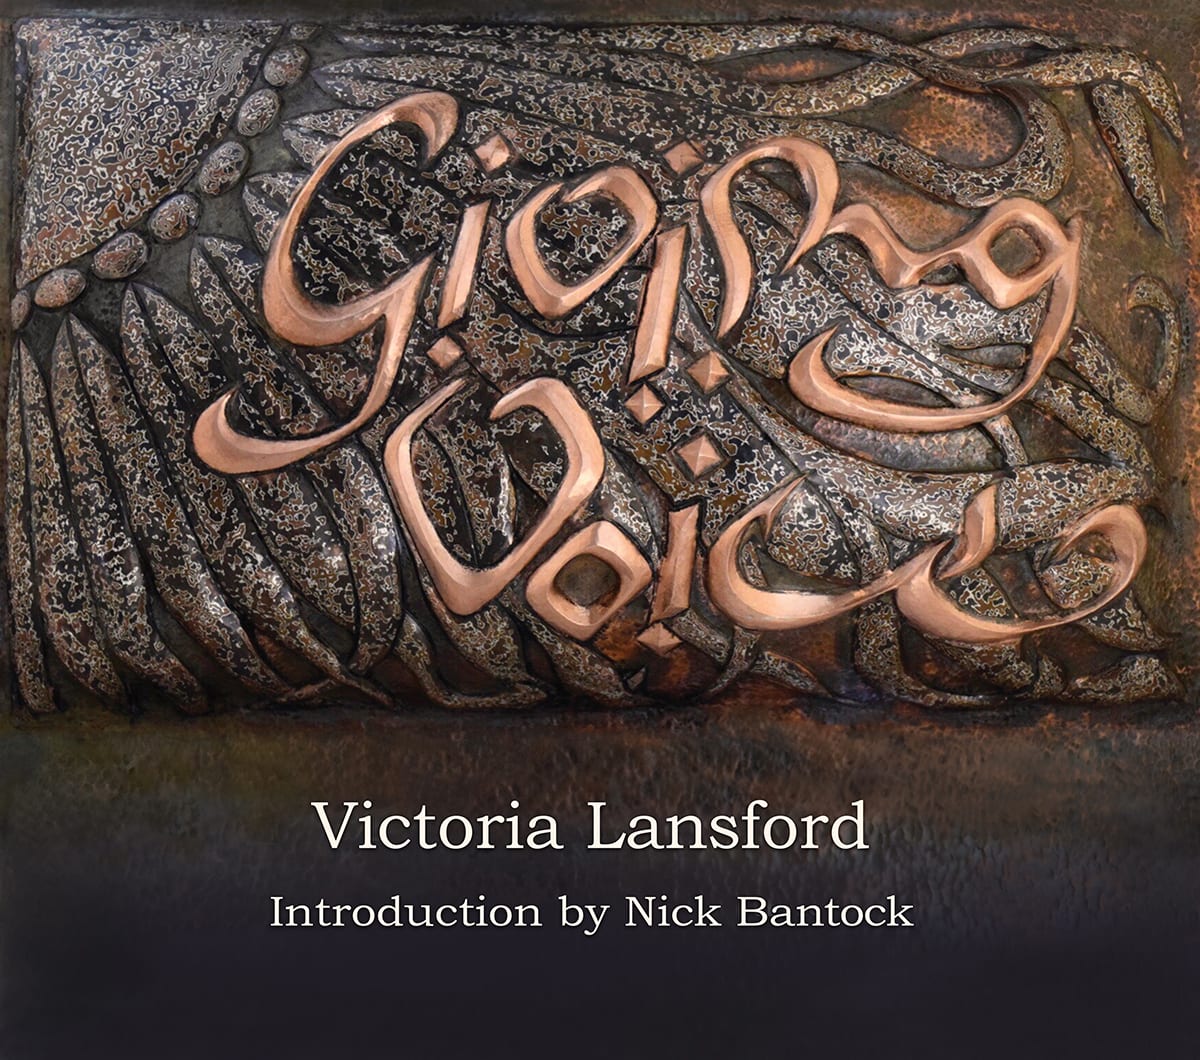 Giving Voice - Print and Animated eBook with Mokume Gane, Eastern Repoussé and Etched Covers by Victoria Lansford  Image: Front cover of hardbound book